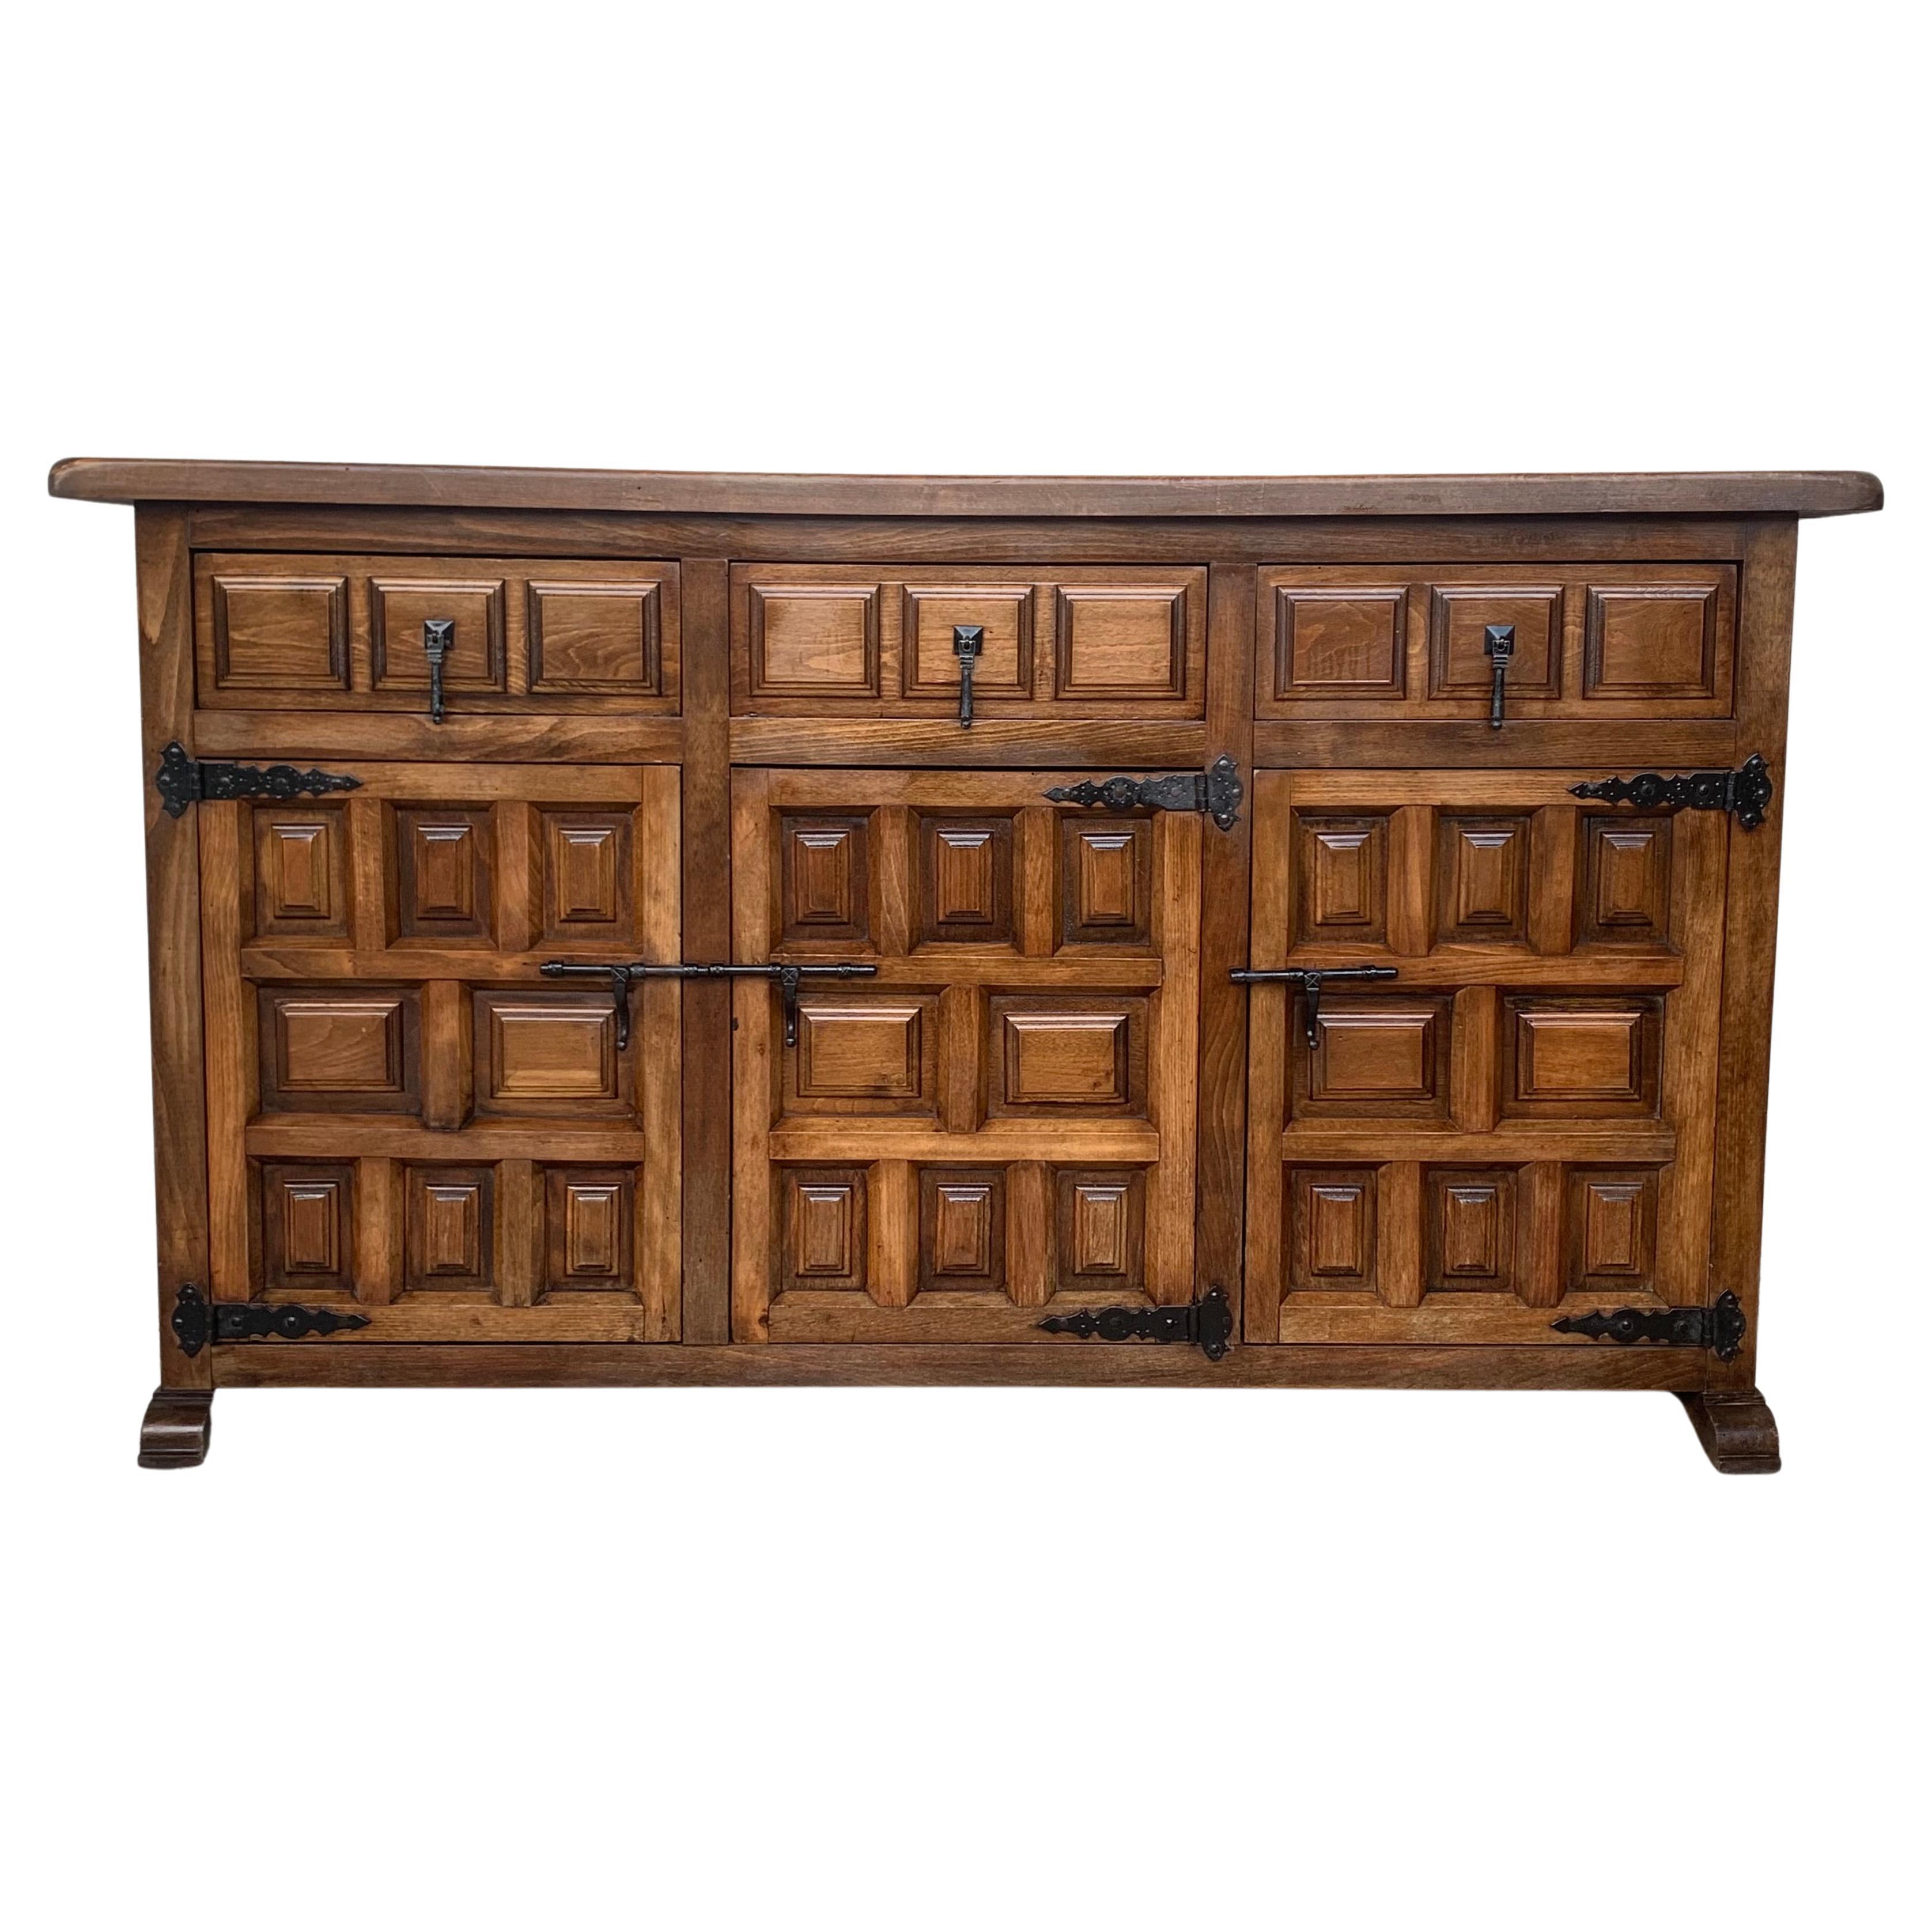 20th Century Large Catalan Spanish Baroque Carved Walnut Cabinet with Three Door